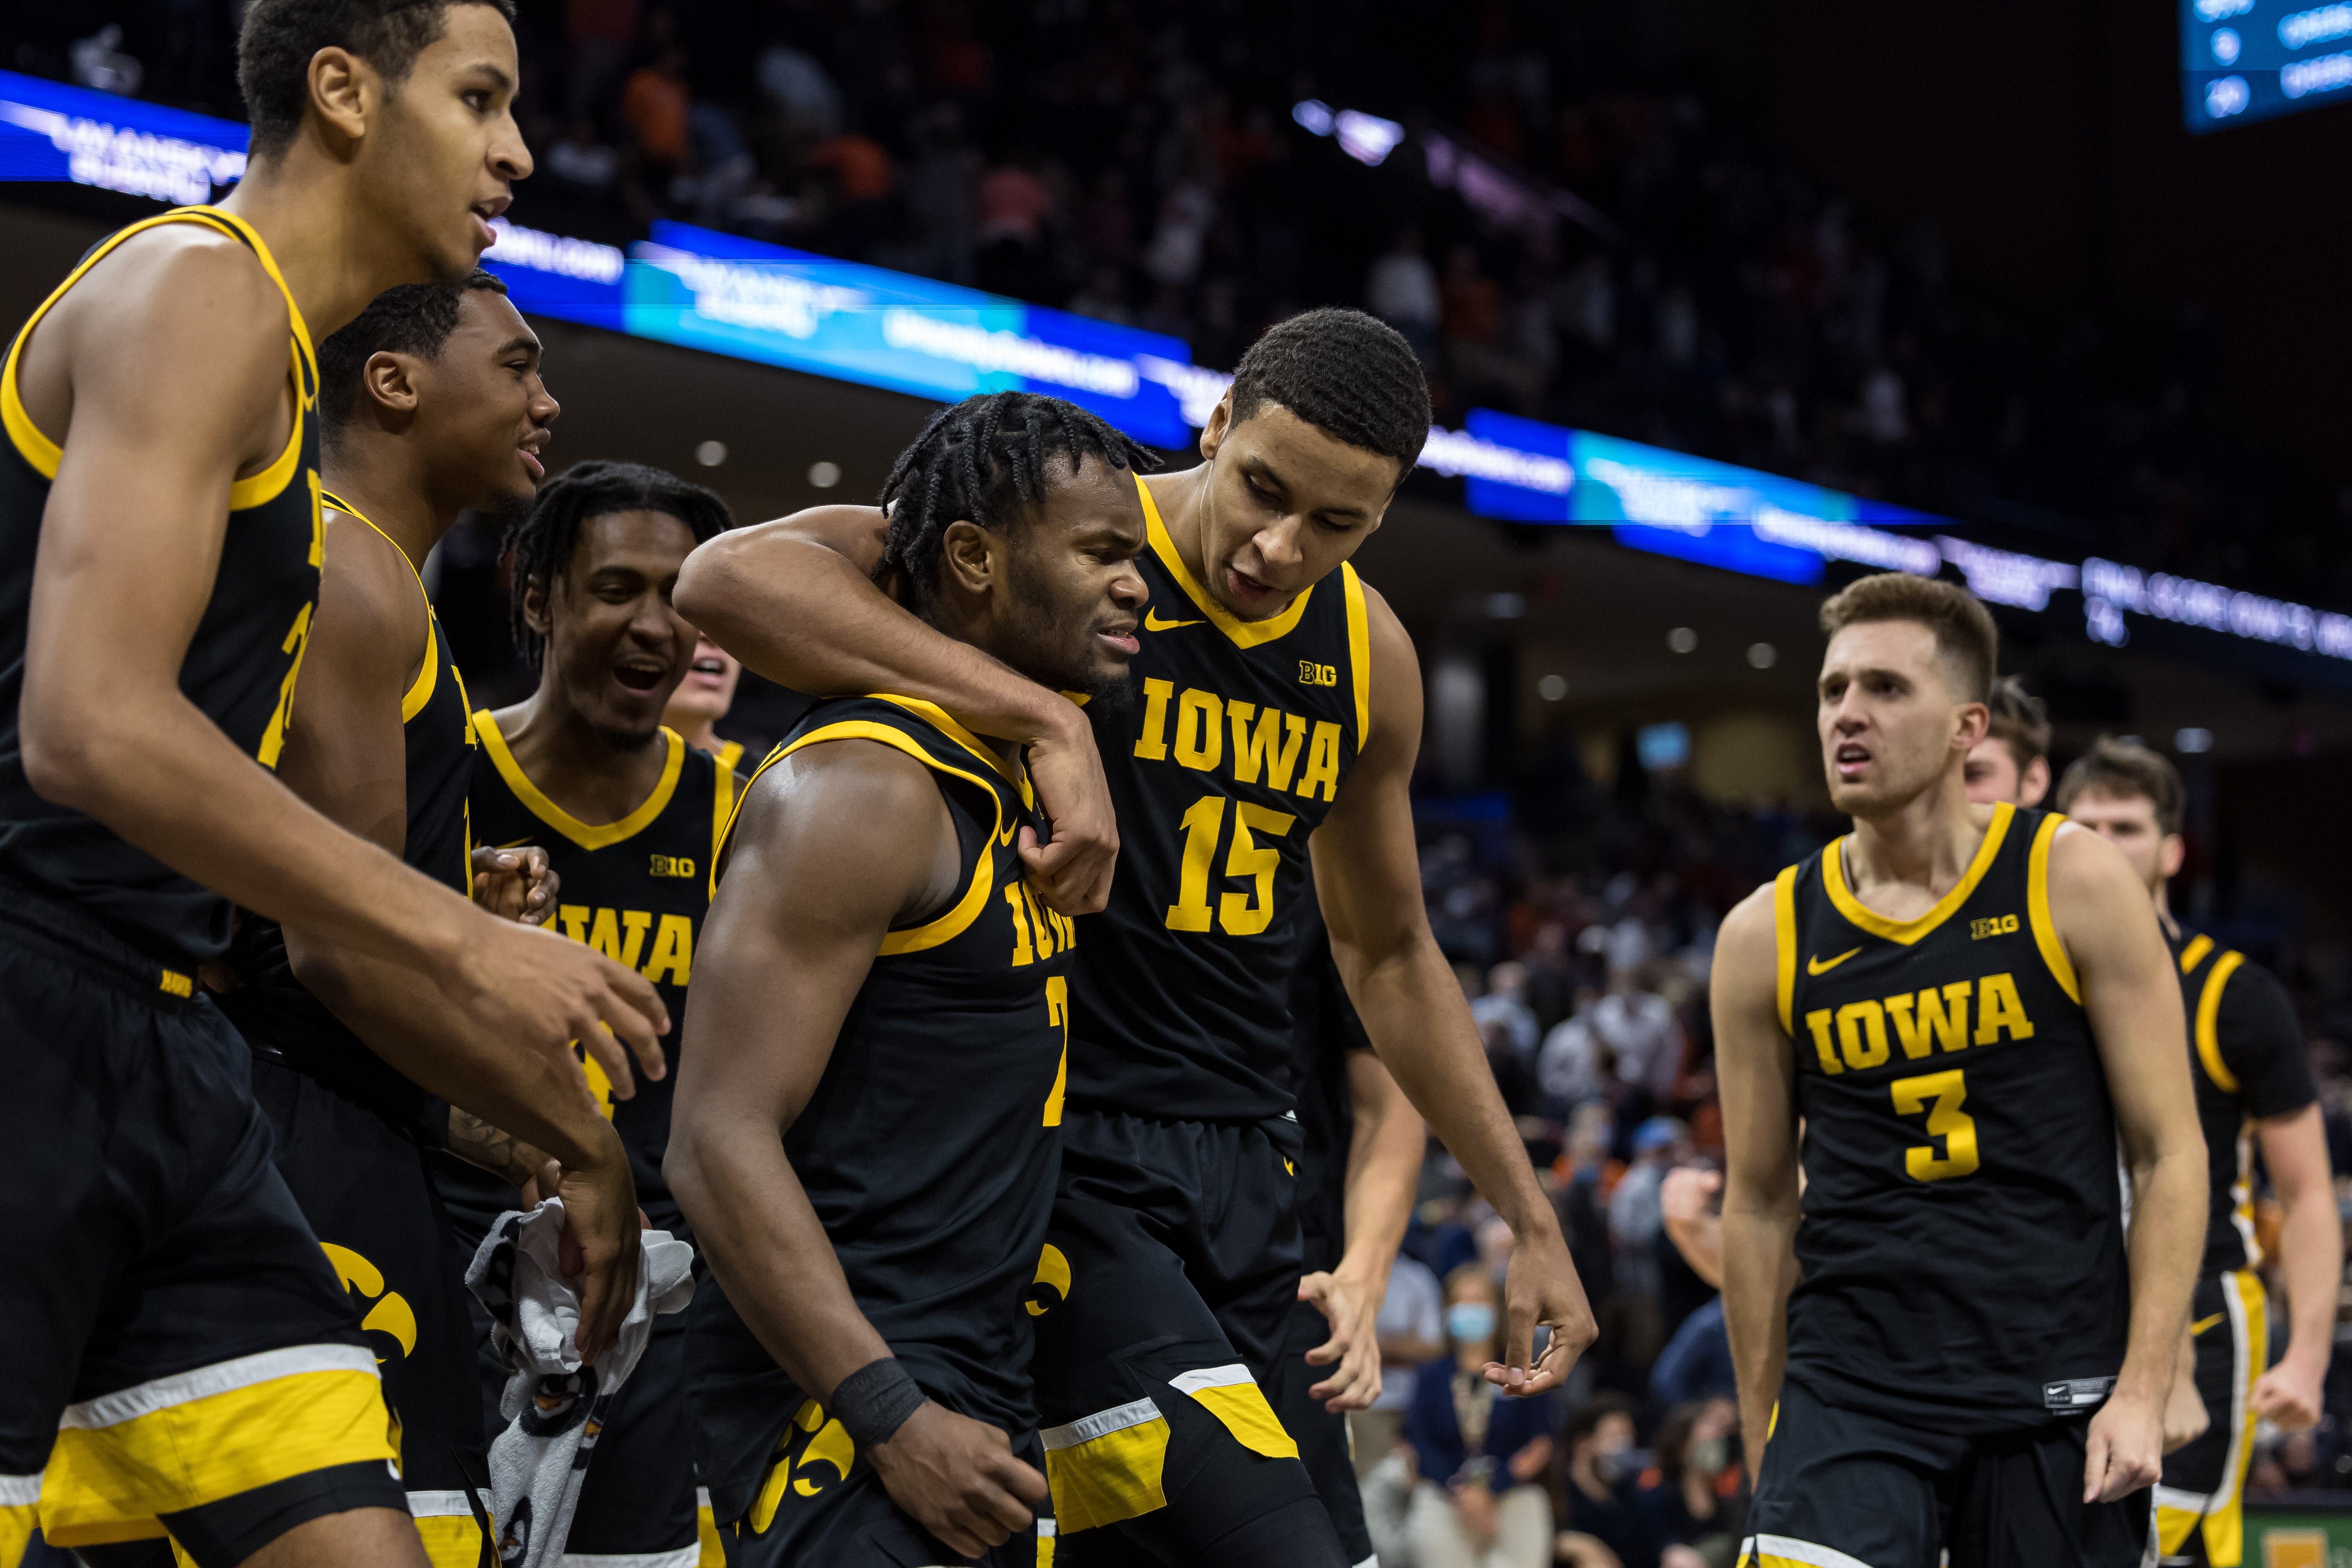 Iowa Hawkeyes guard Joe Toussaint (2) celebrates with forward Keegan Murray (15) and teammates after the game against the Virginia Cavaliers, Monday, Nov. 29, 2021, at John Paul Jones Arena in Charlottesville, Va.